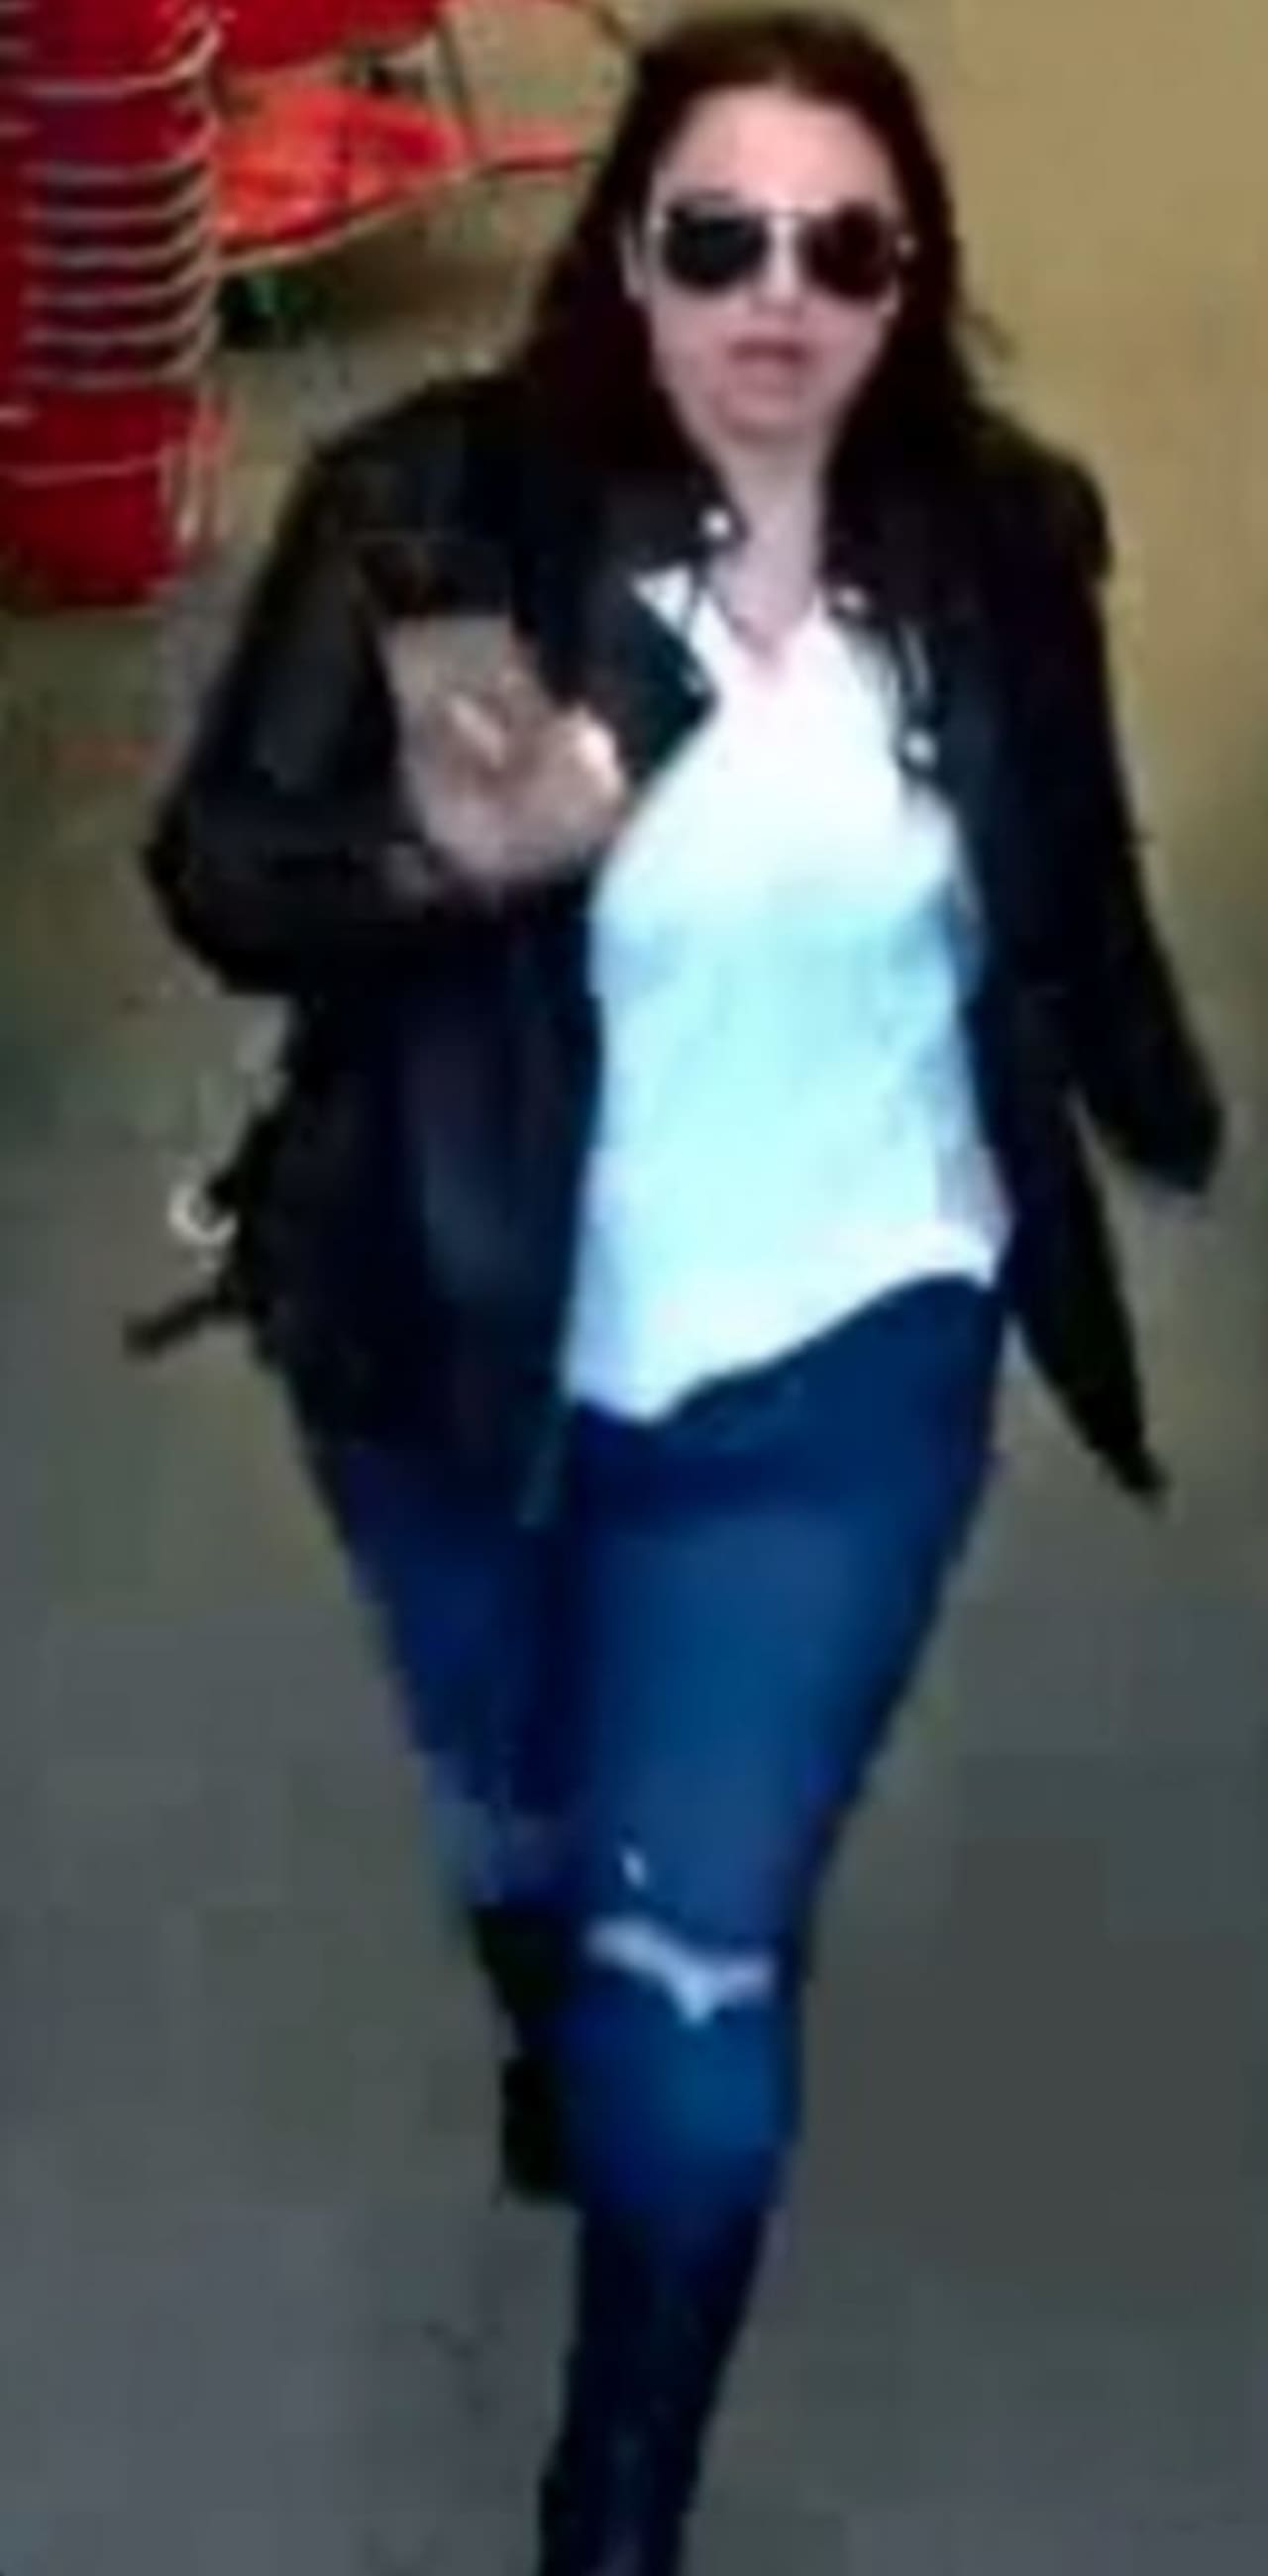 Woman suspected of stealing credit cards from gym locker, using them at retail stores throughout Melville and Huntington Station, police say